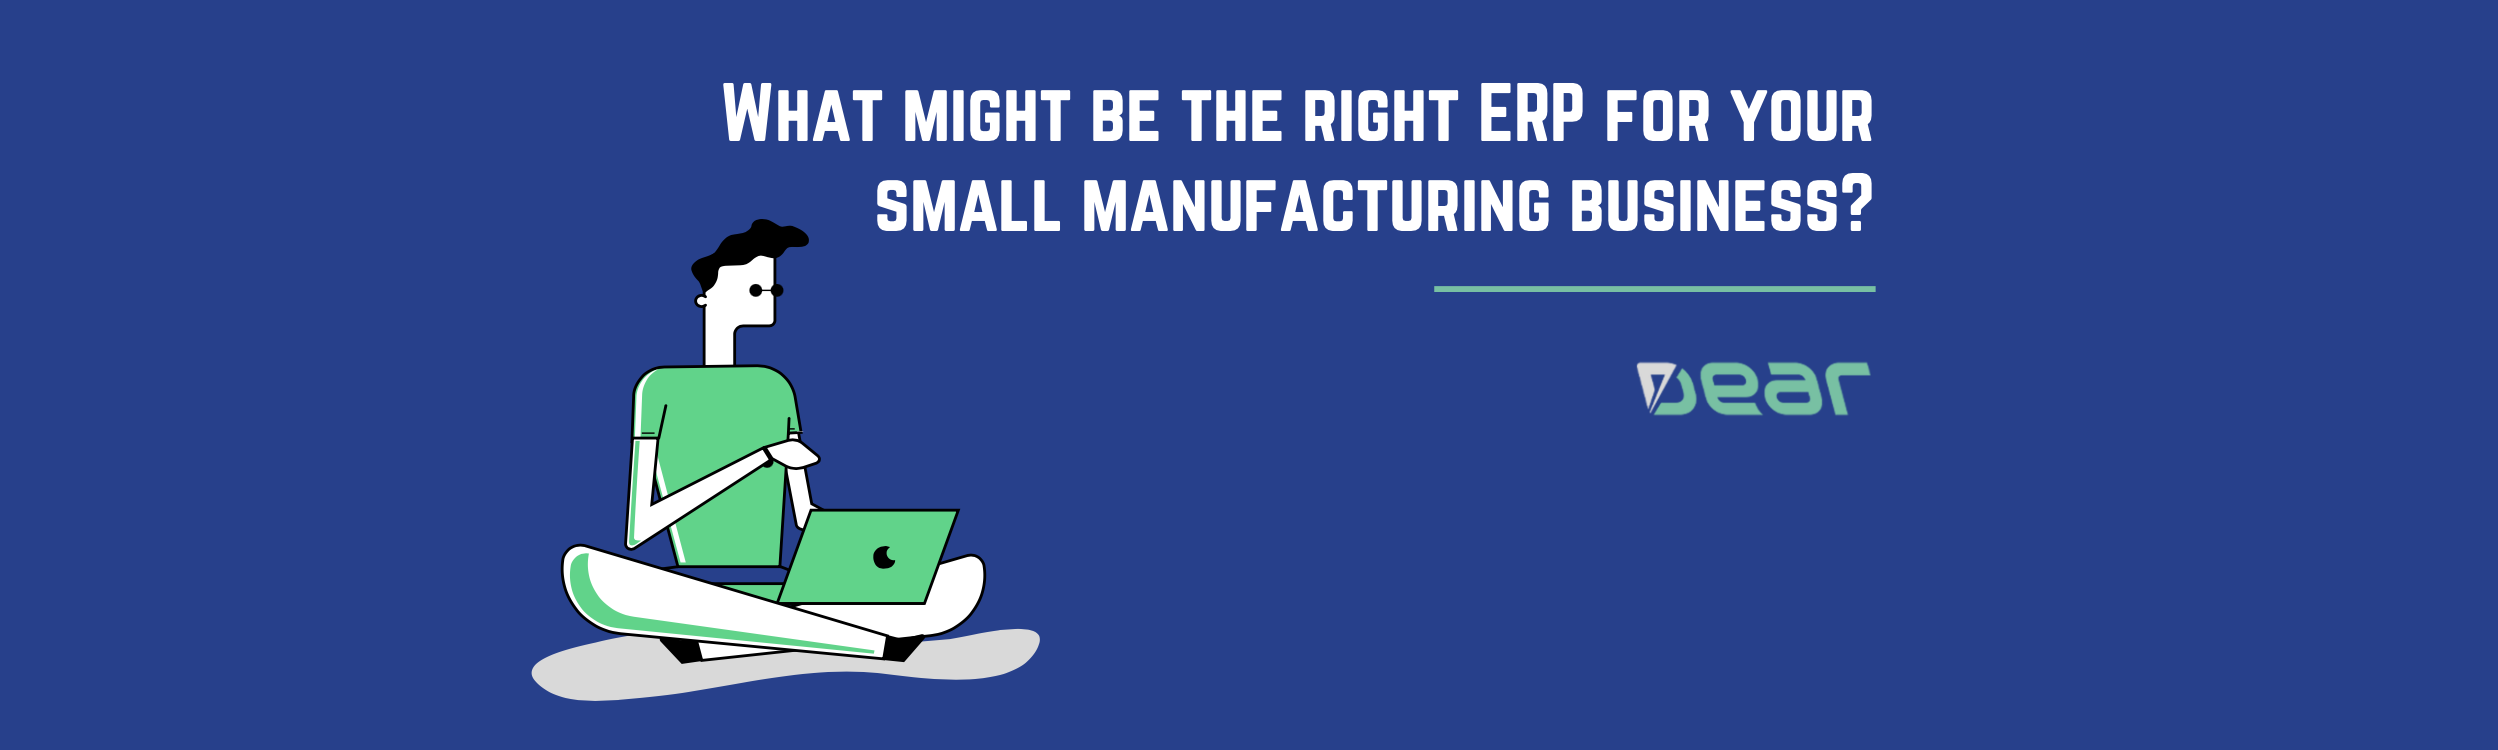 What might be the ERP for your small manufacturing business